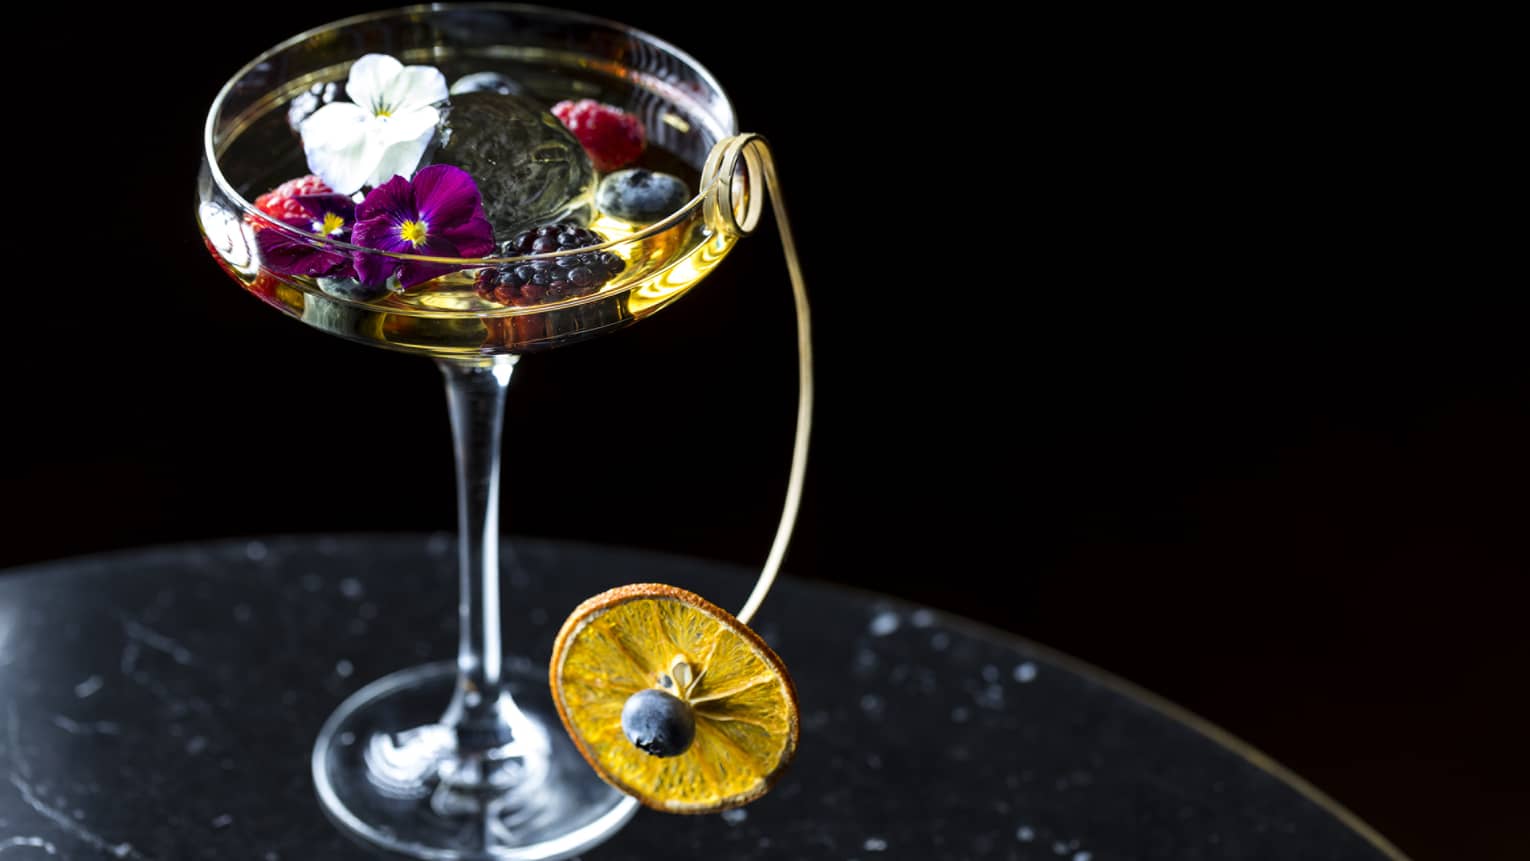 Cocktail glass. liquor garnished with small flowers, berries and dried orange wheel